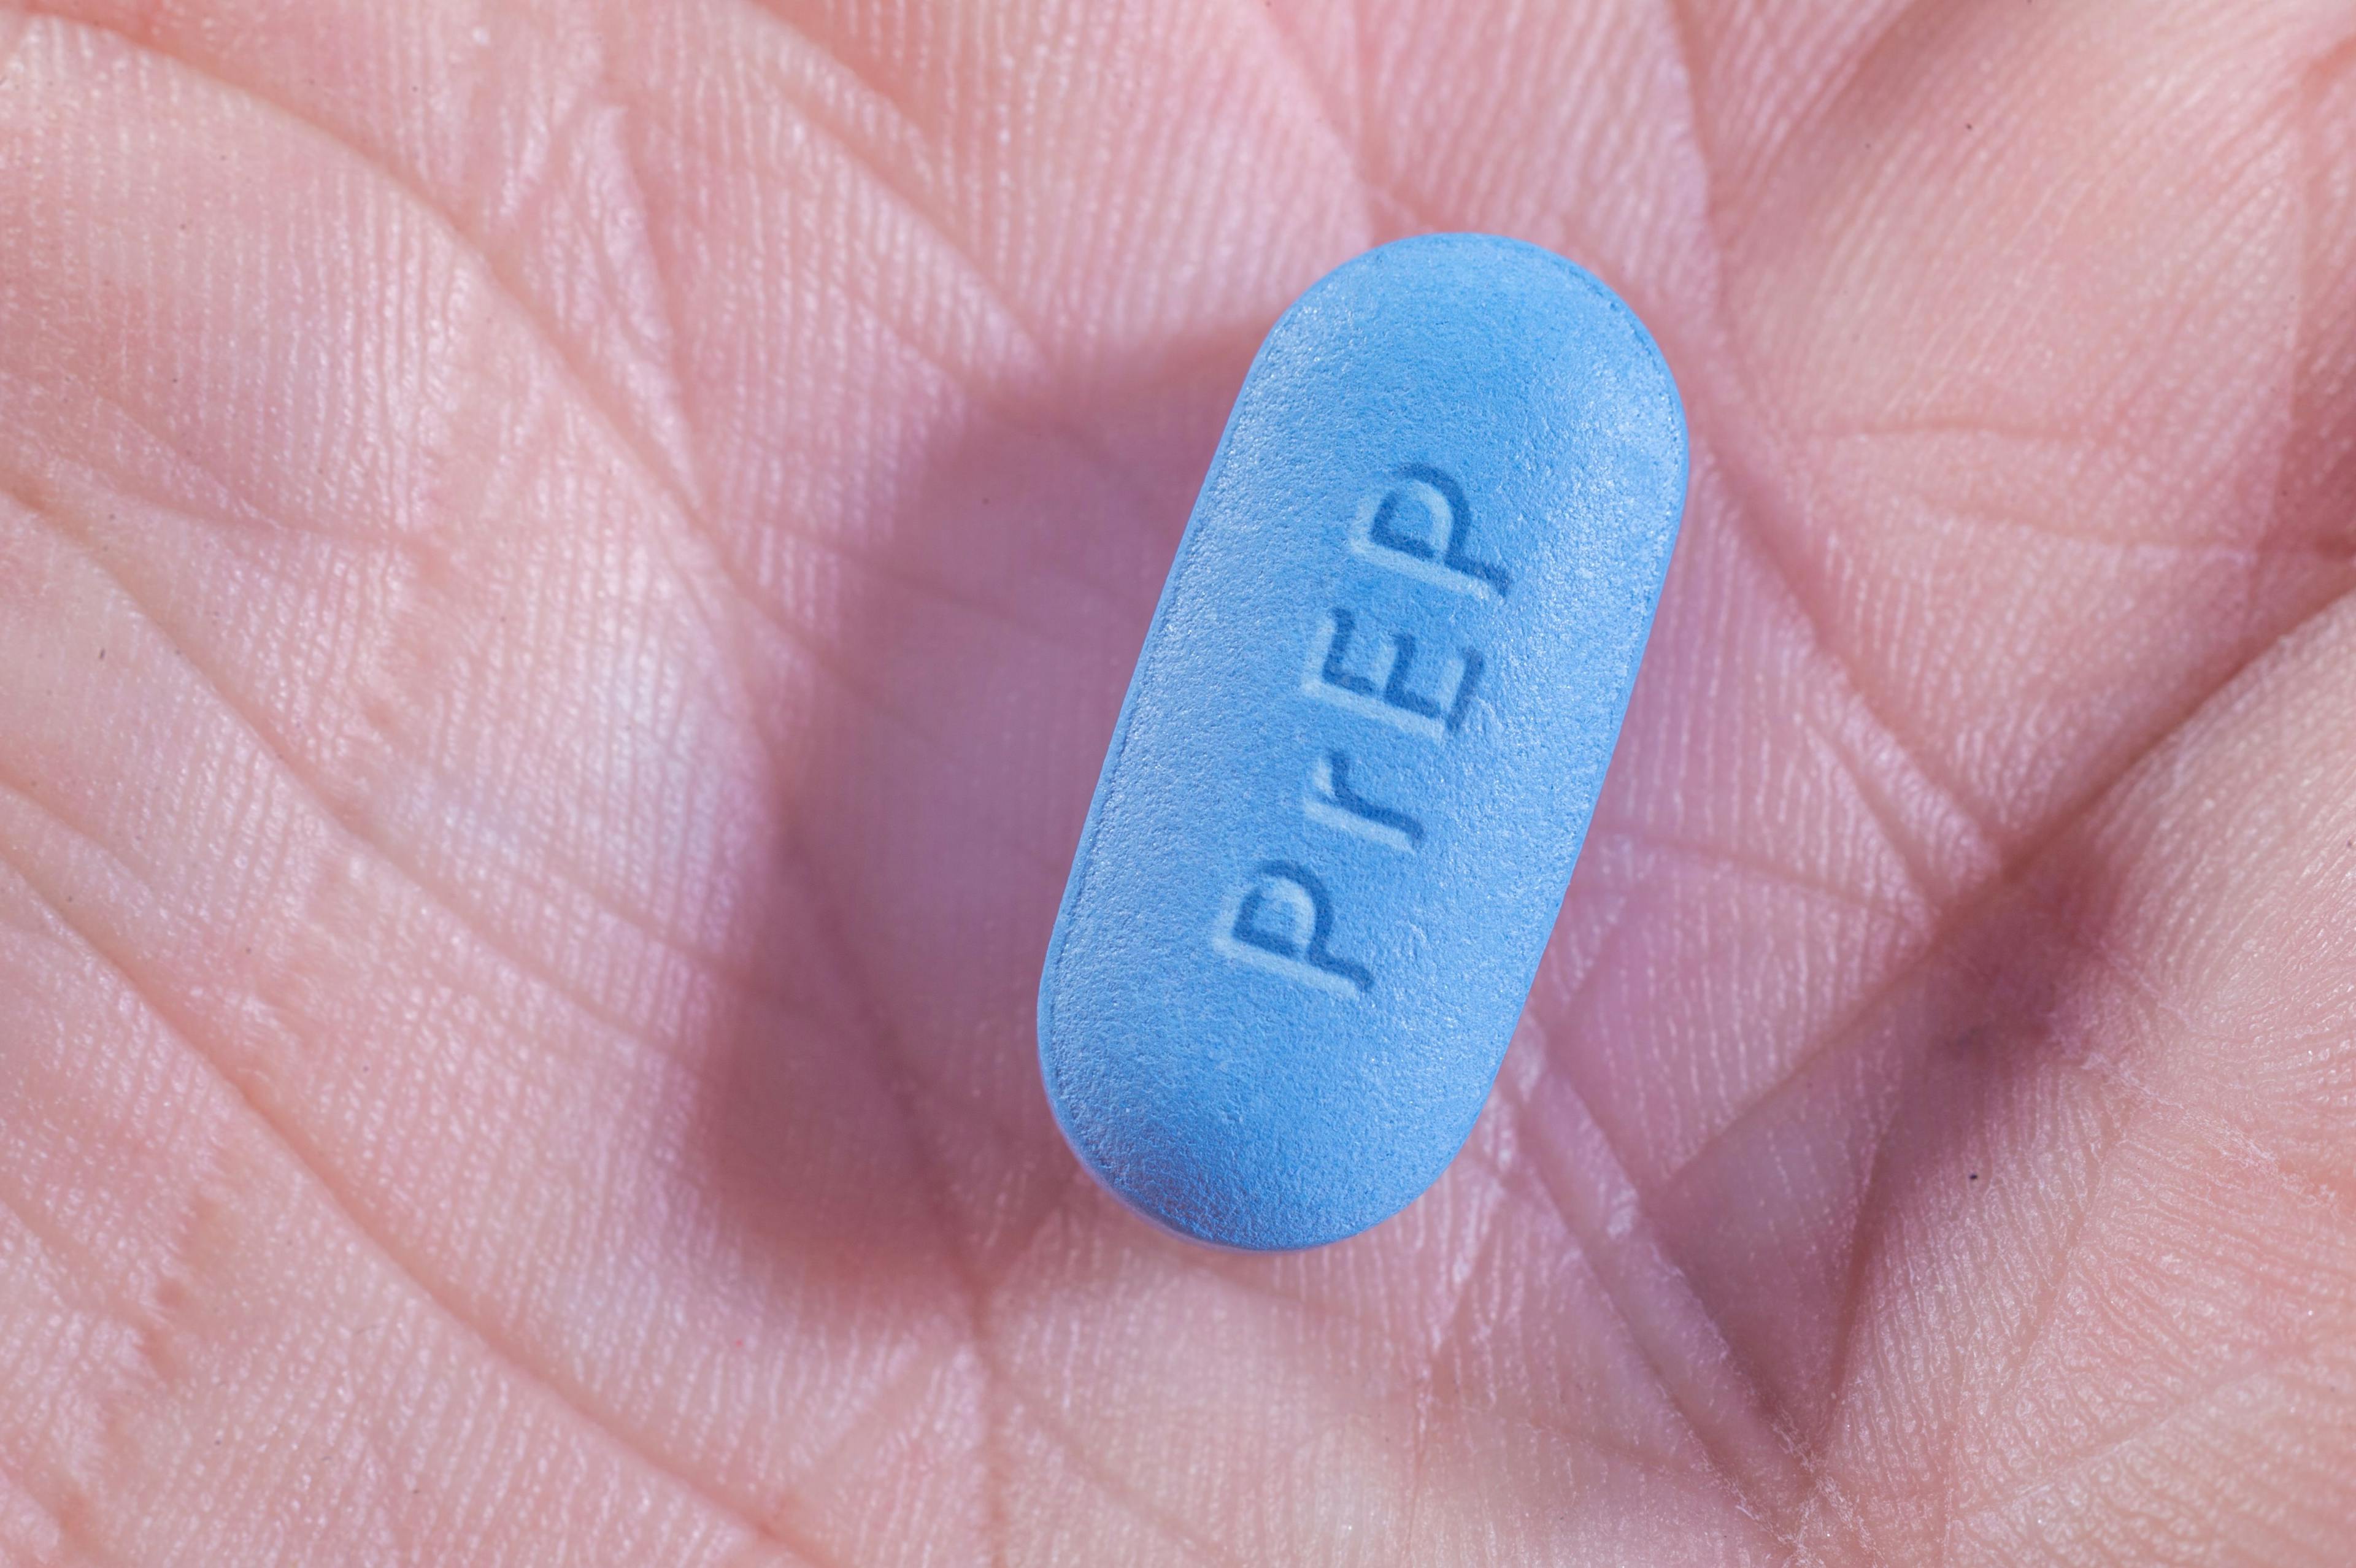 PrEP Delivery Remains Low Among Those With Opioid/Stimulant Use Disorder